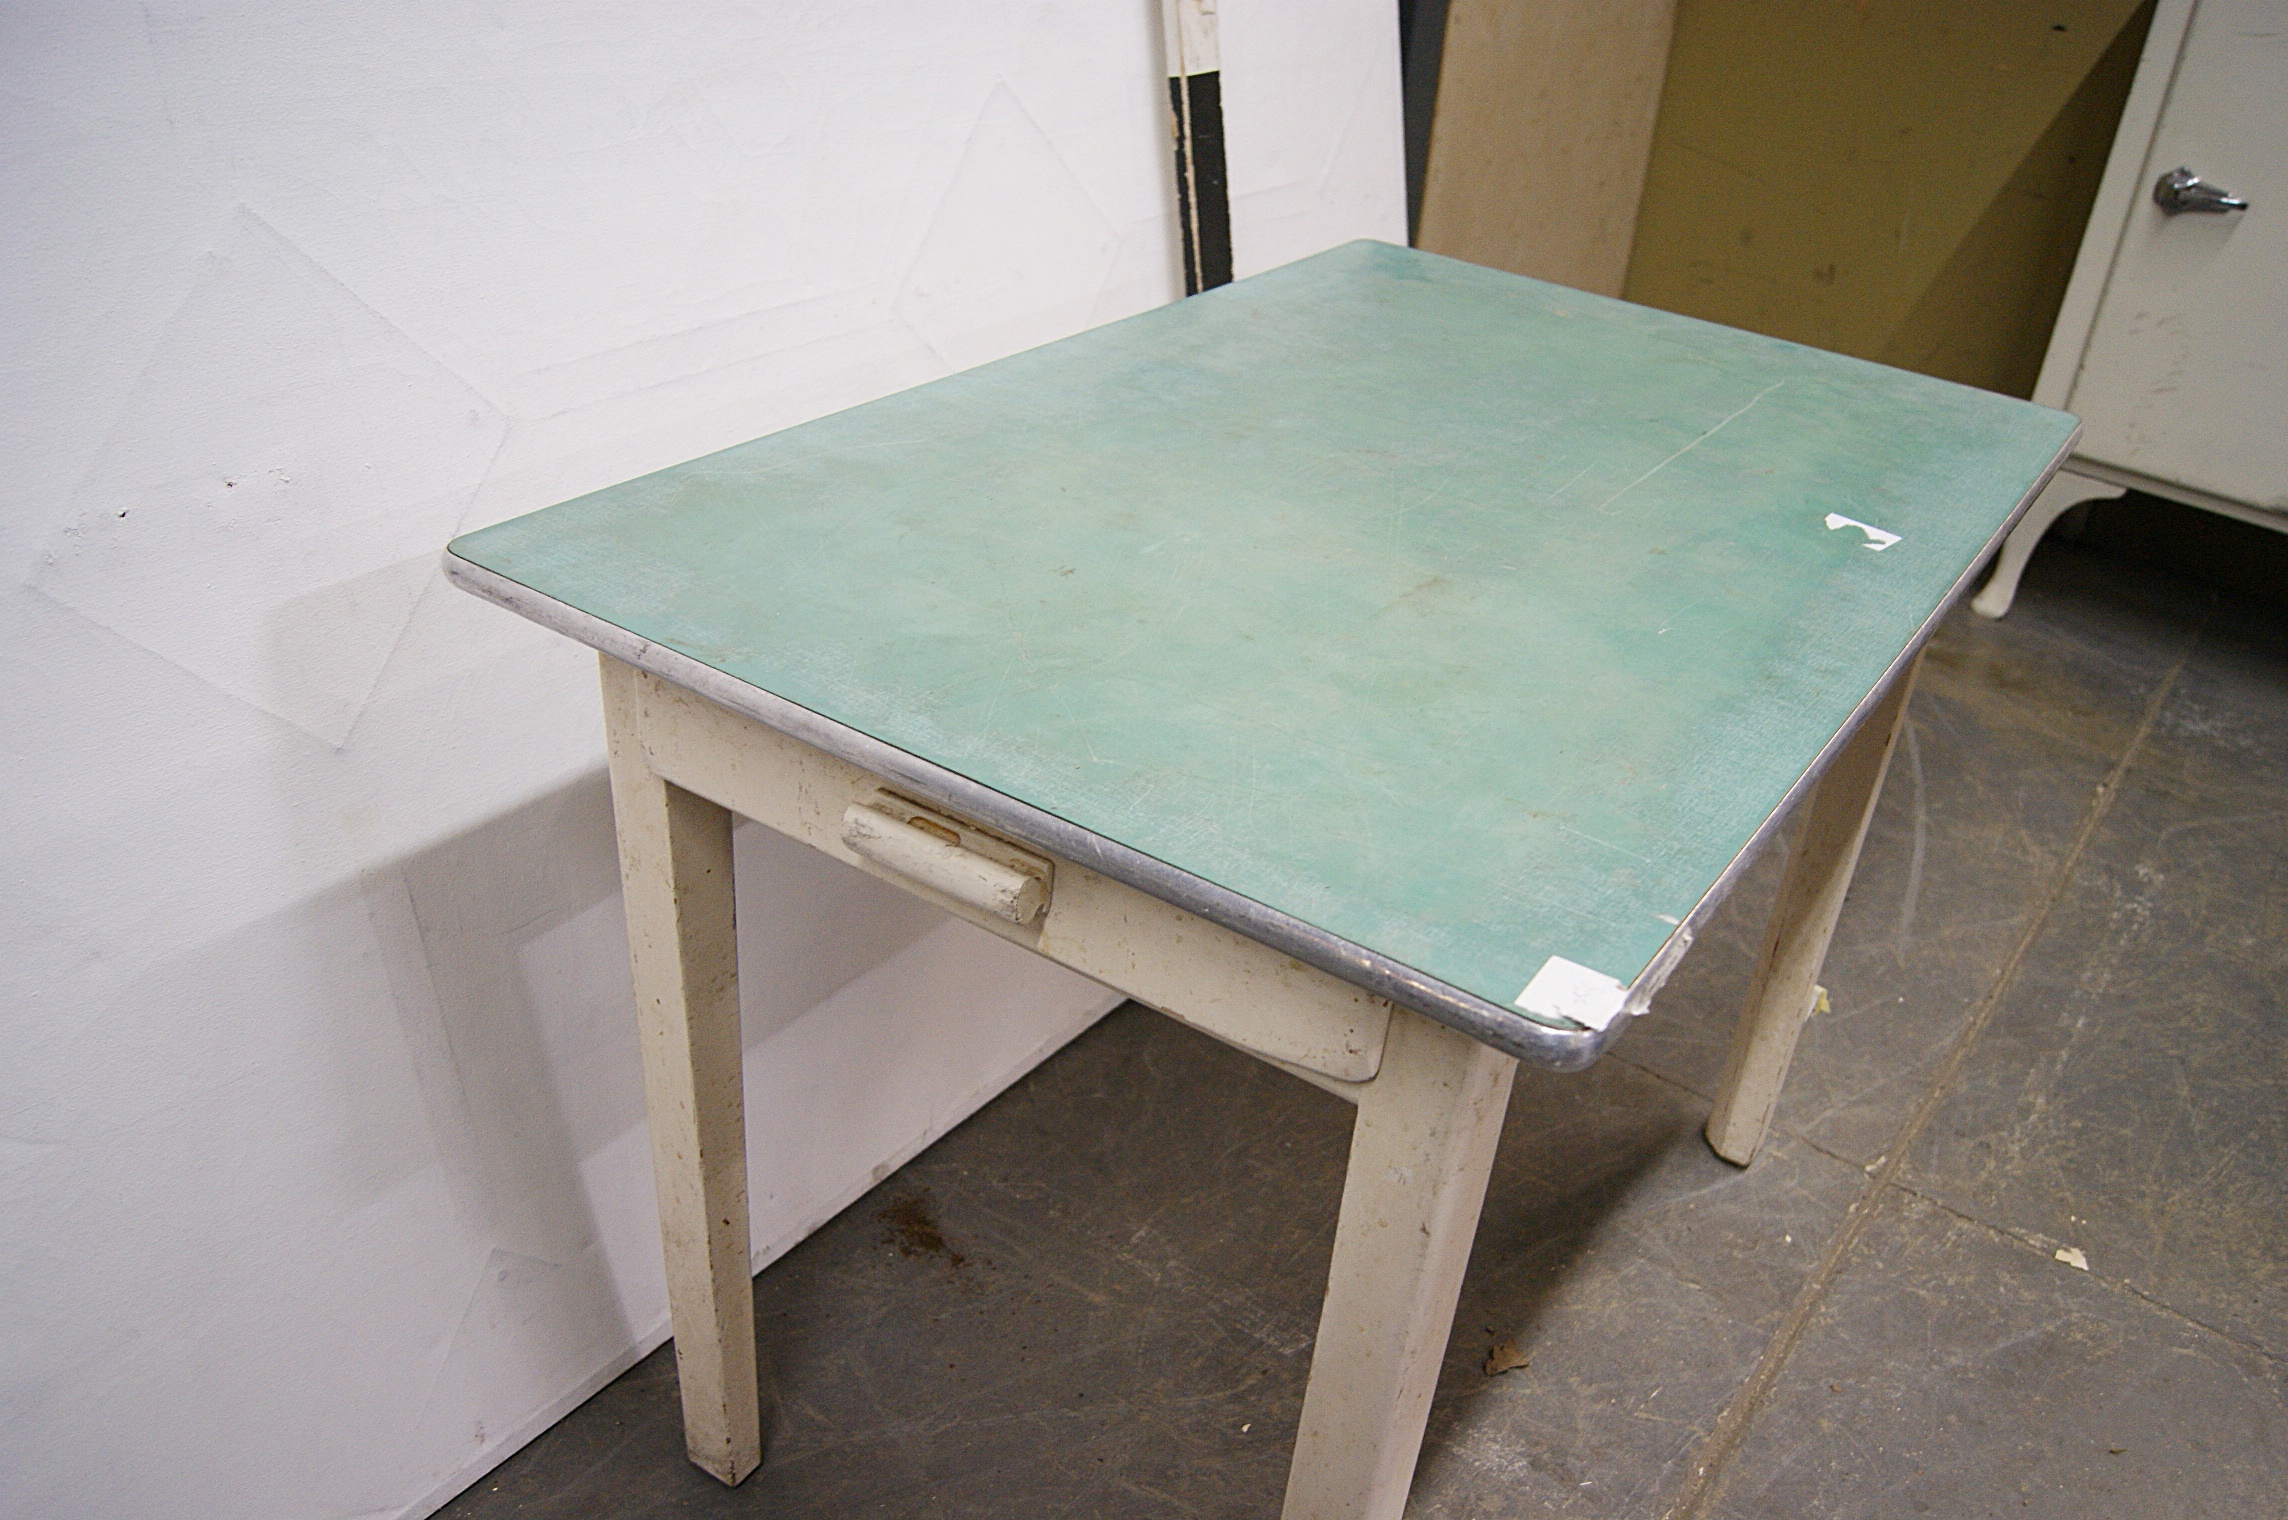 1180136 Green Formica Top Kitchen Table With Drawer H 77cm X 107 X 69 Stockyard Prop And Backdrop Hire